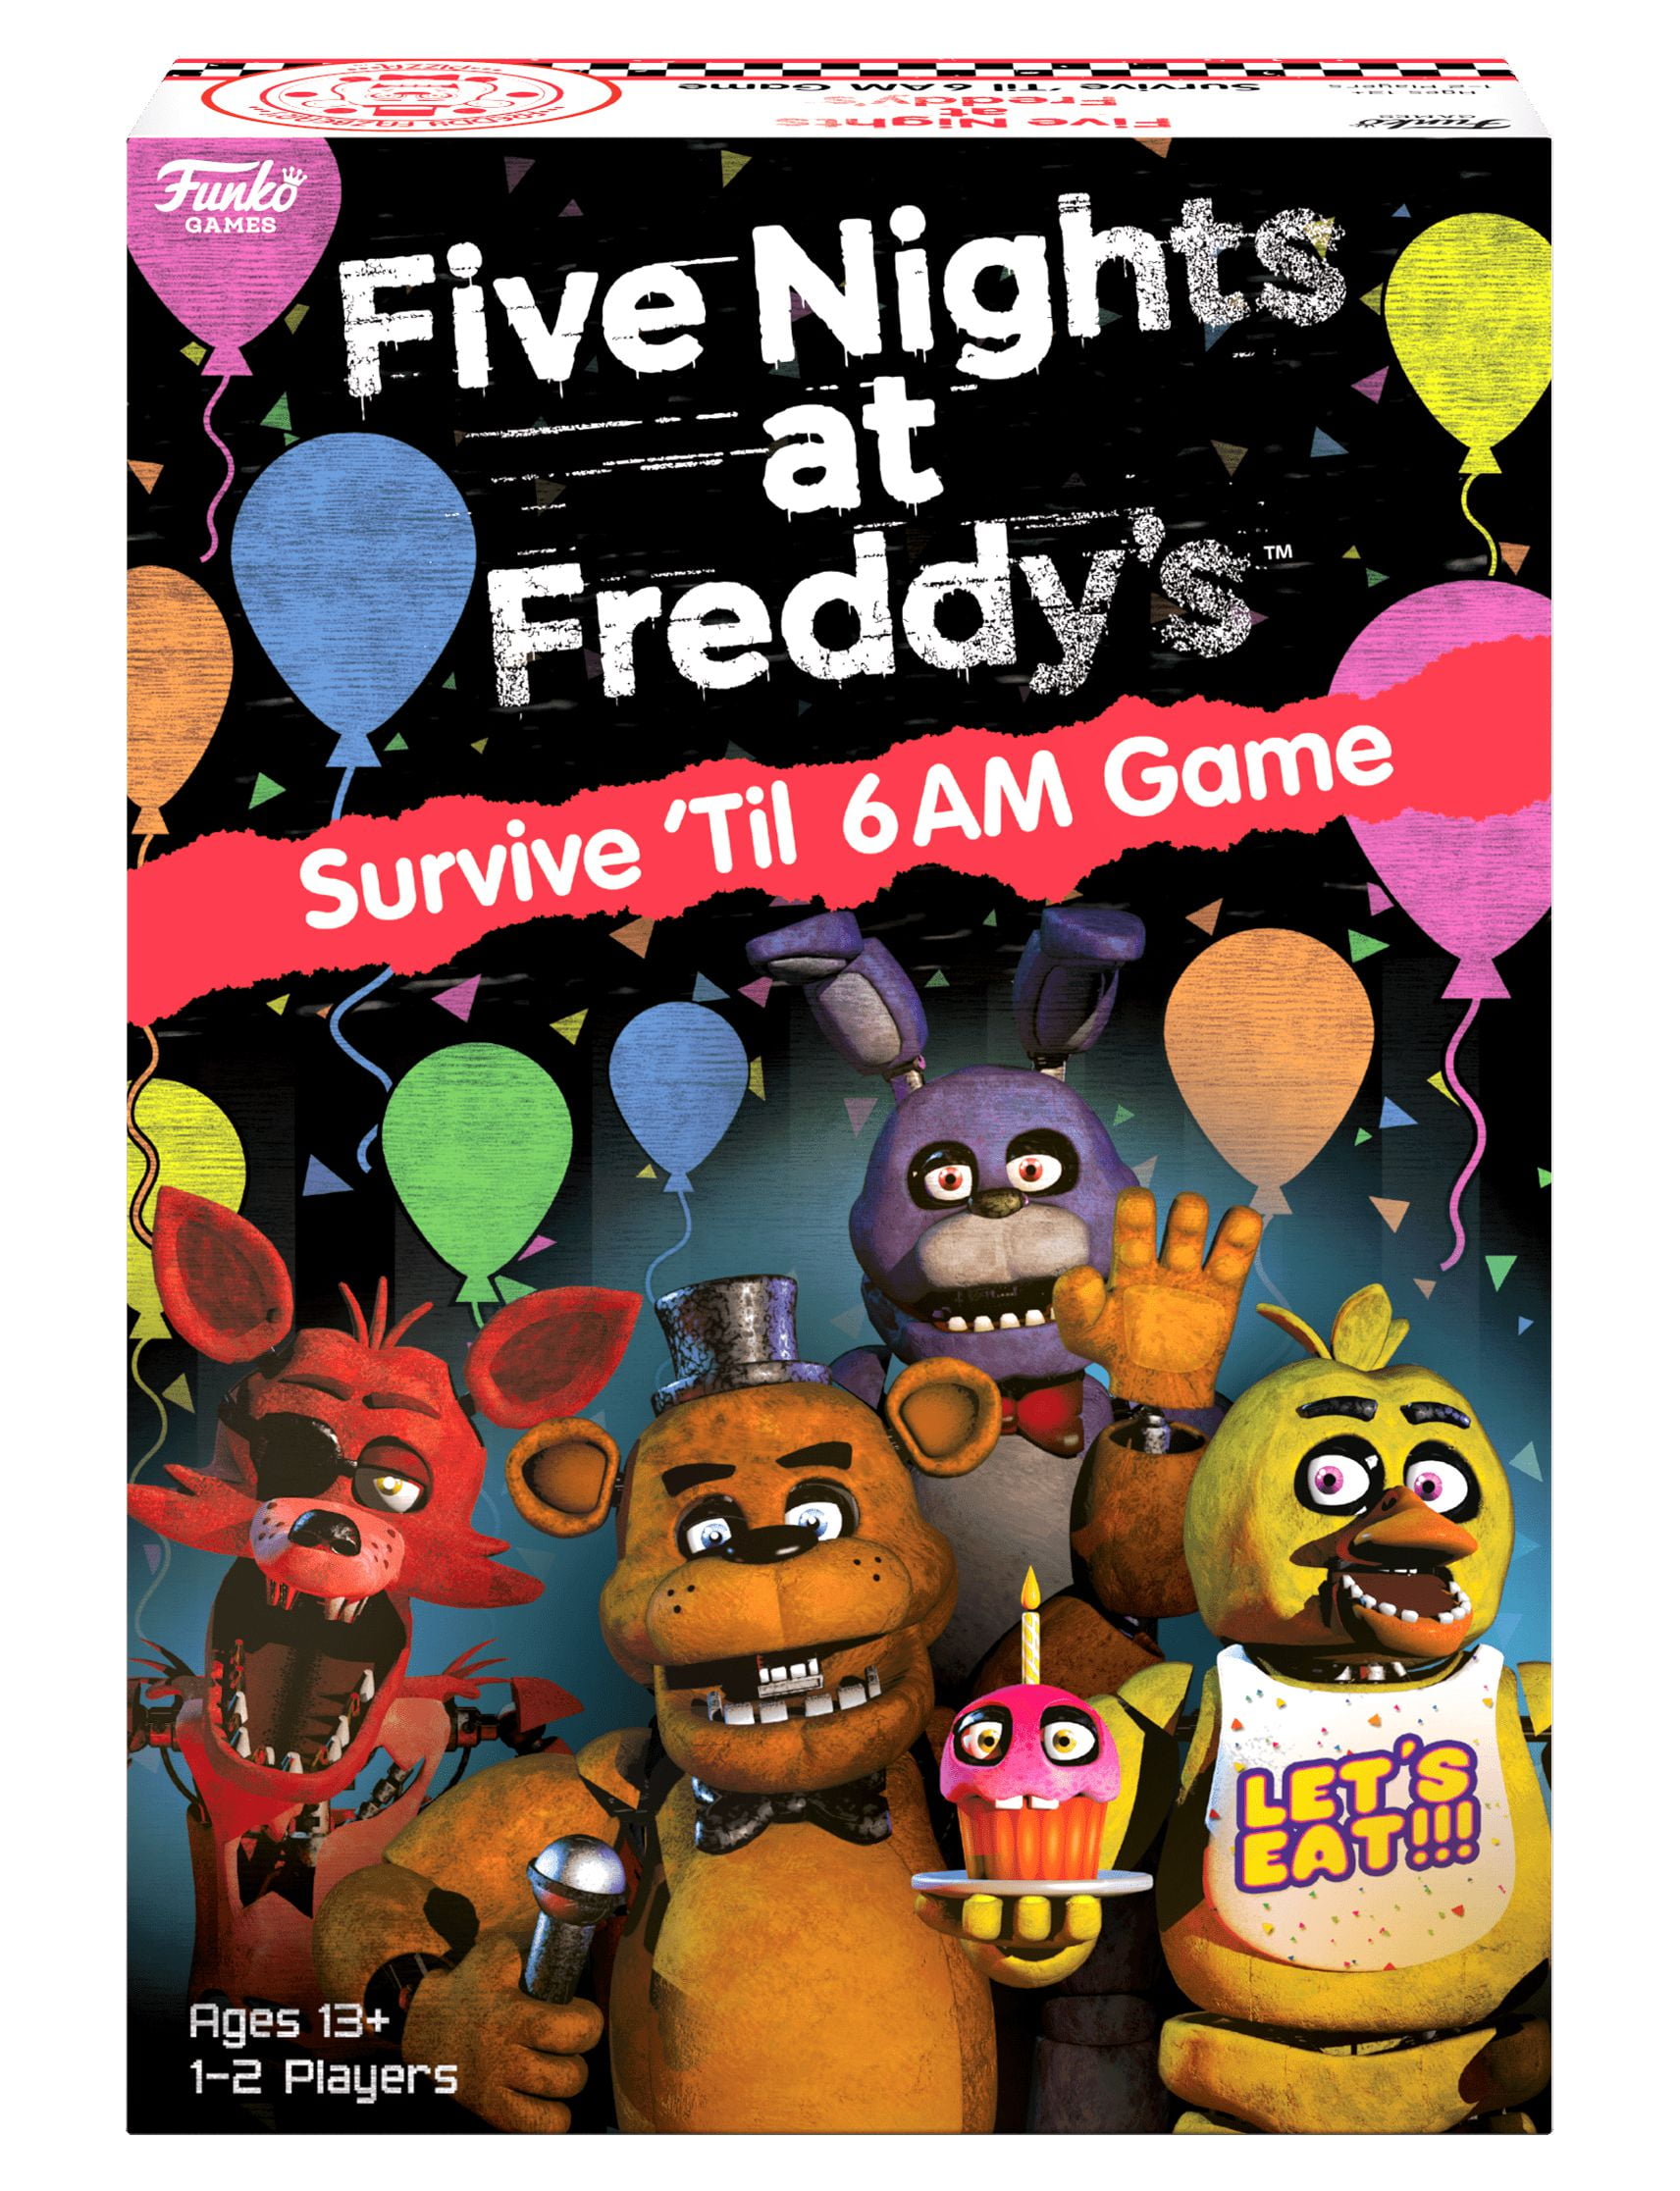 Five Nights at Freddy's 4 hits Steam early, bringing a 6-year